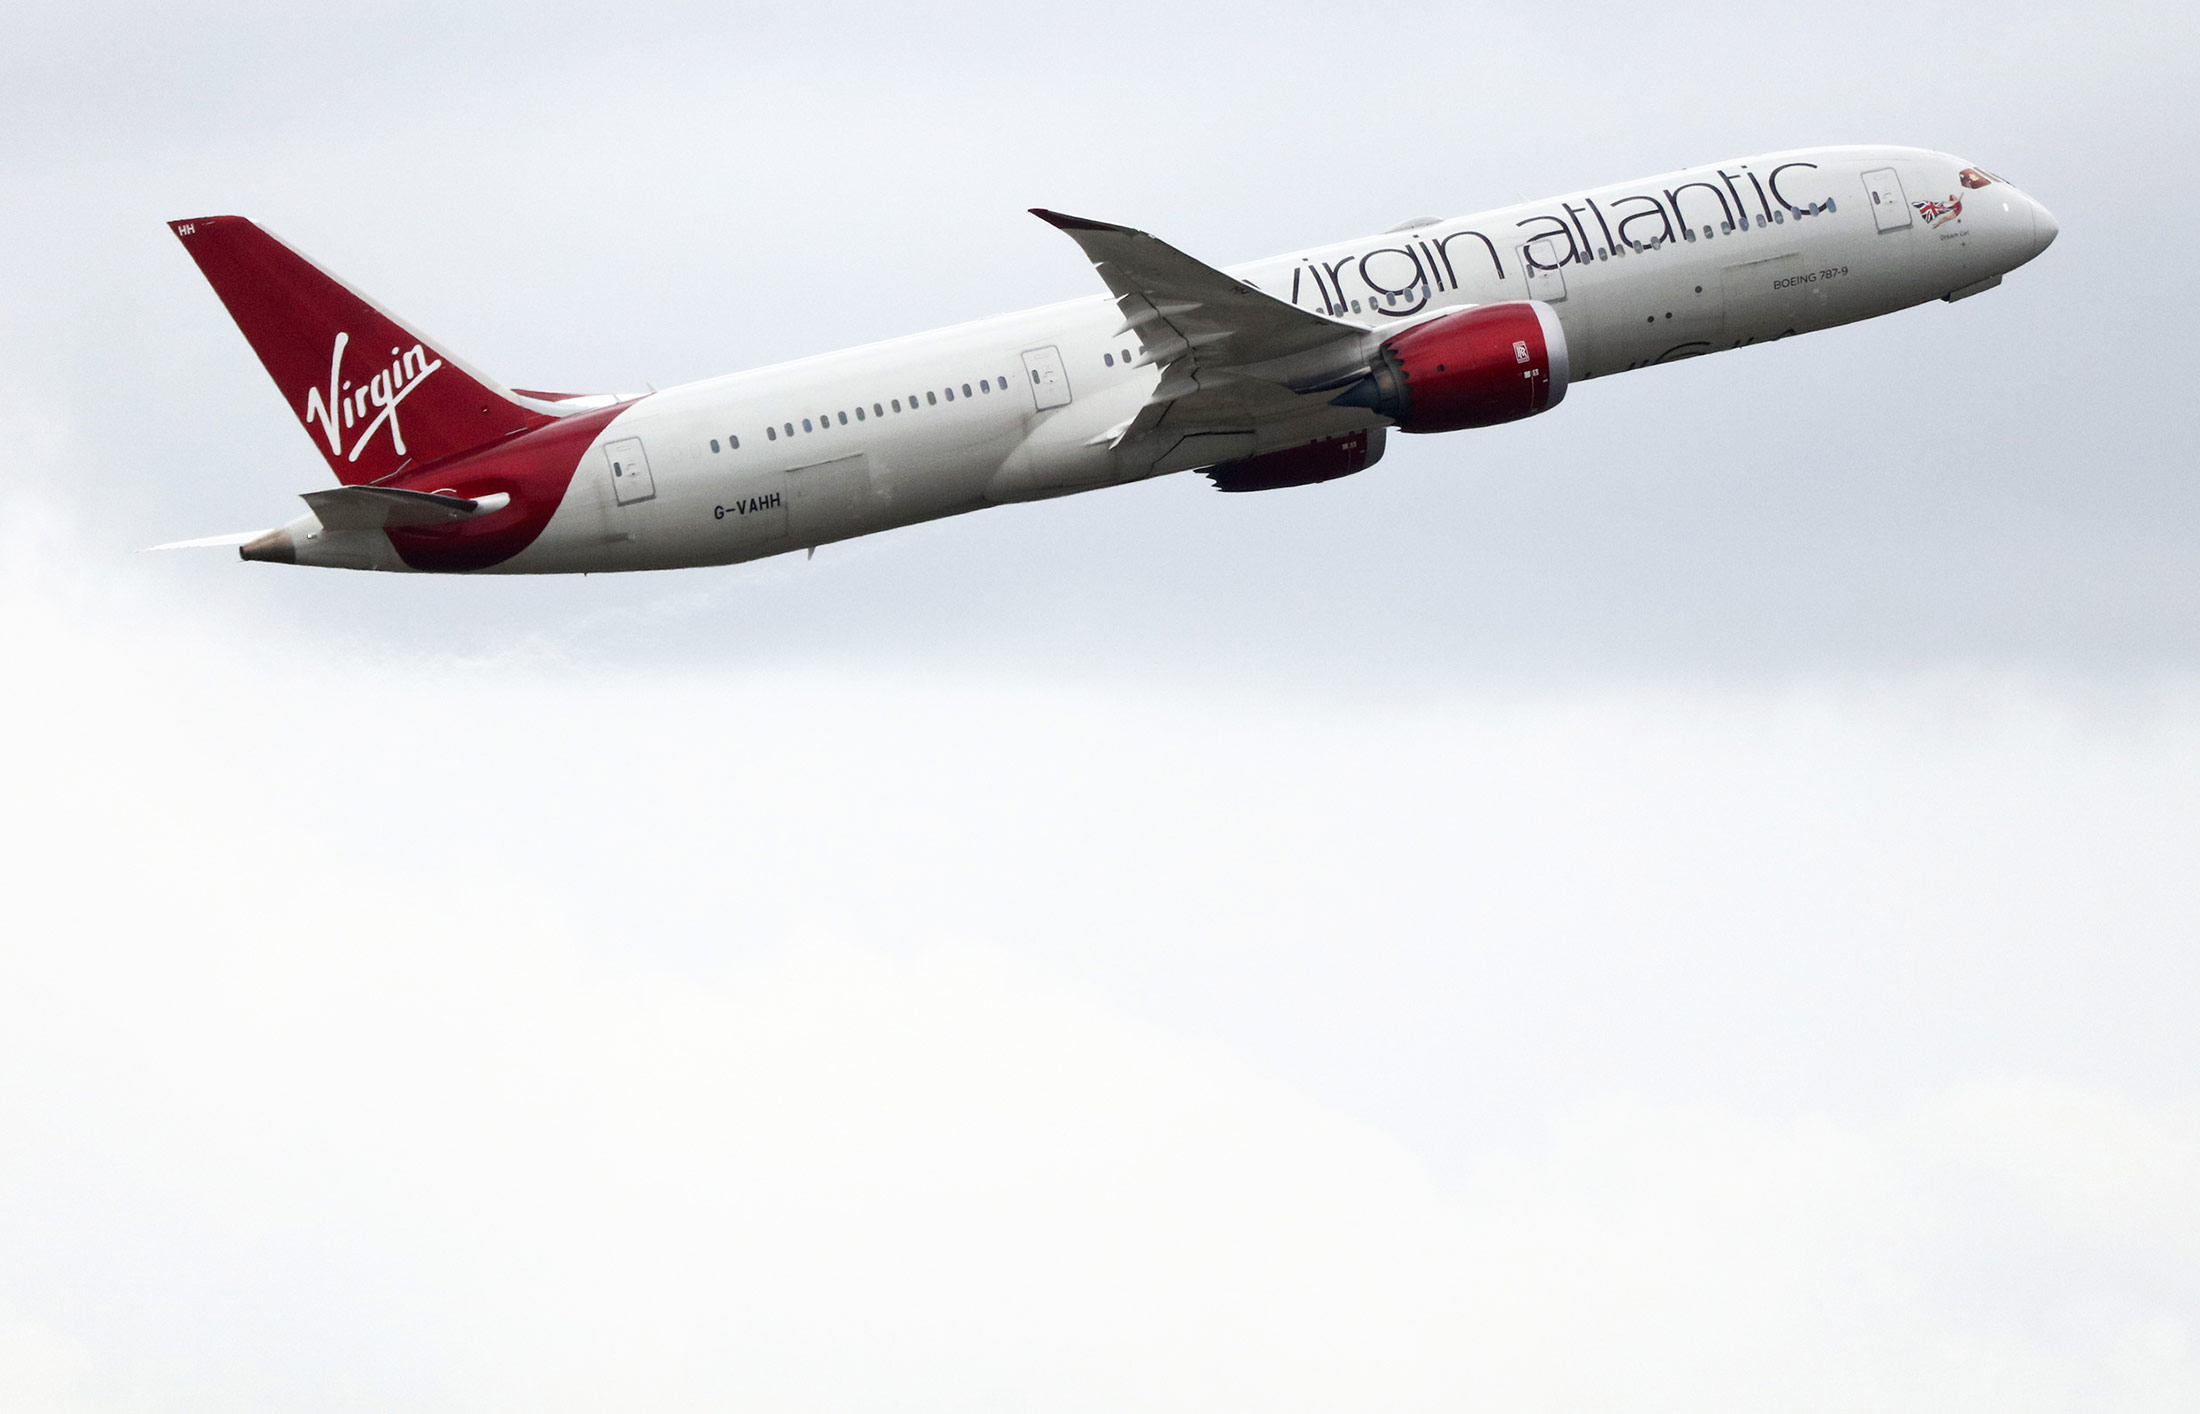 A Boeing Co. 787 Dreamliner passenger aircraft, operated by Virgin Atlantic Airways Ltd., takes off from Heathrow.
